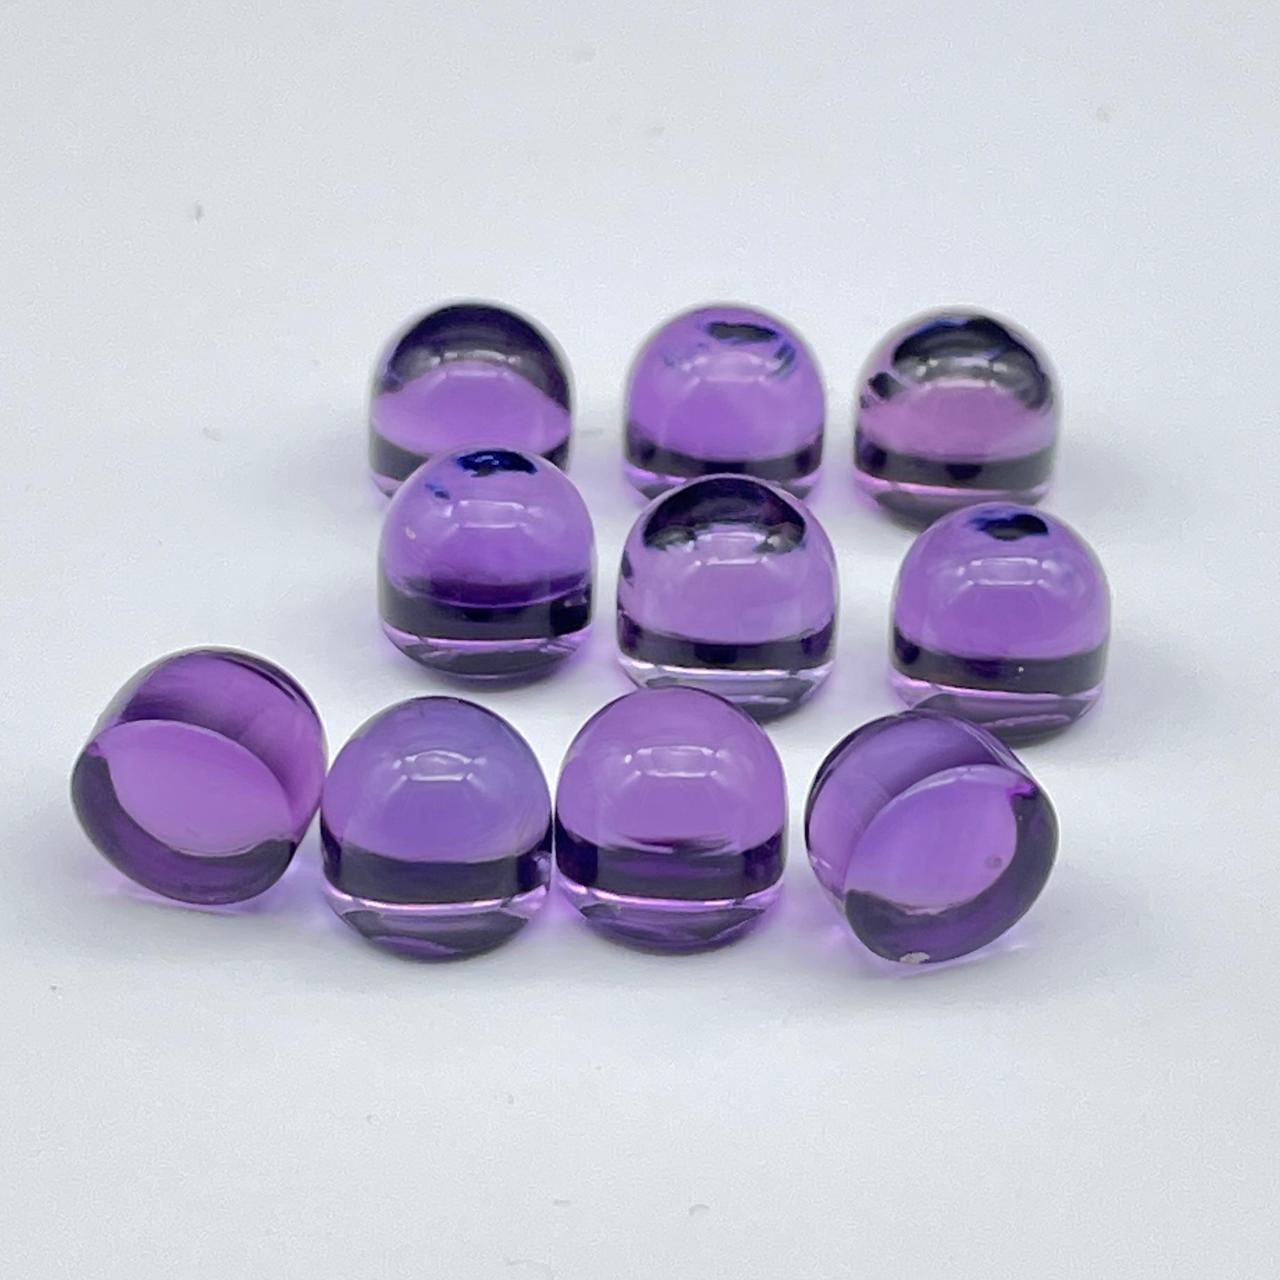 Natural Amethyst 8 mm Round Top Quality Bullets Gemstone (Natural)